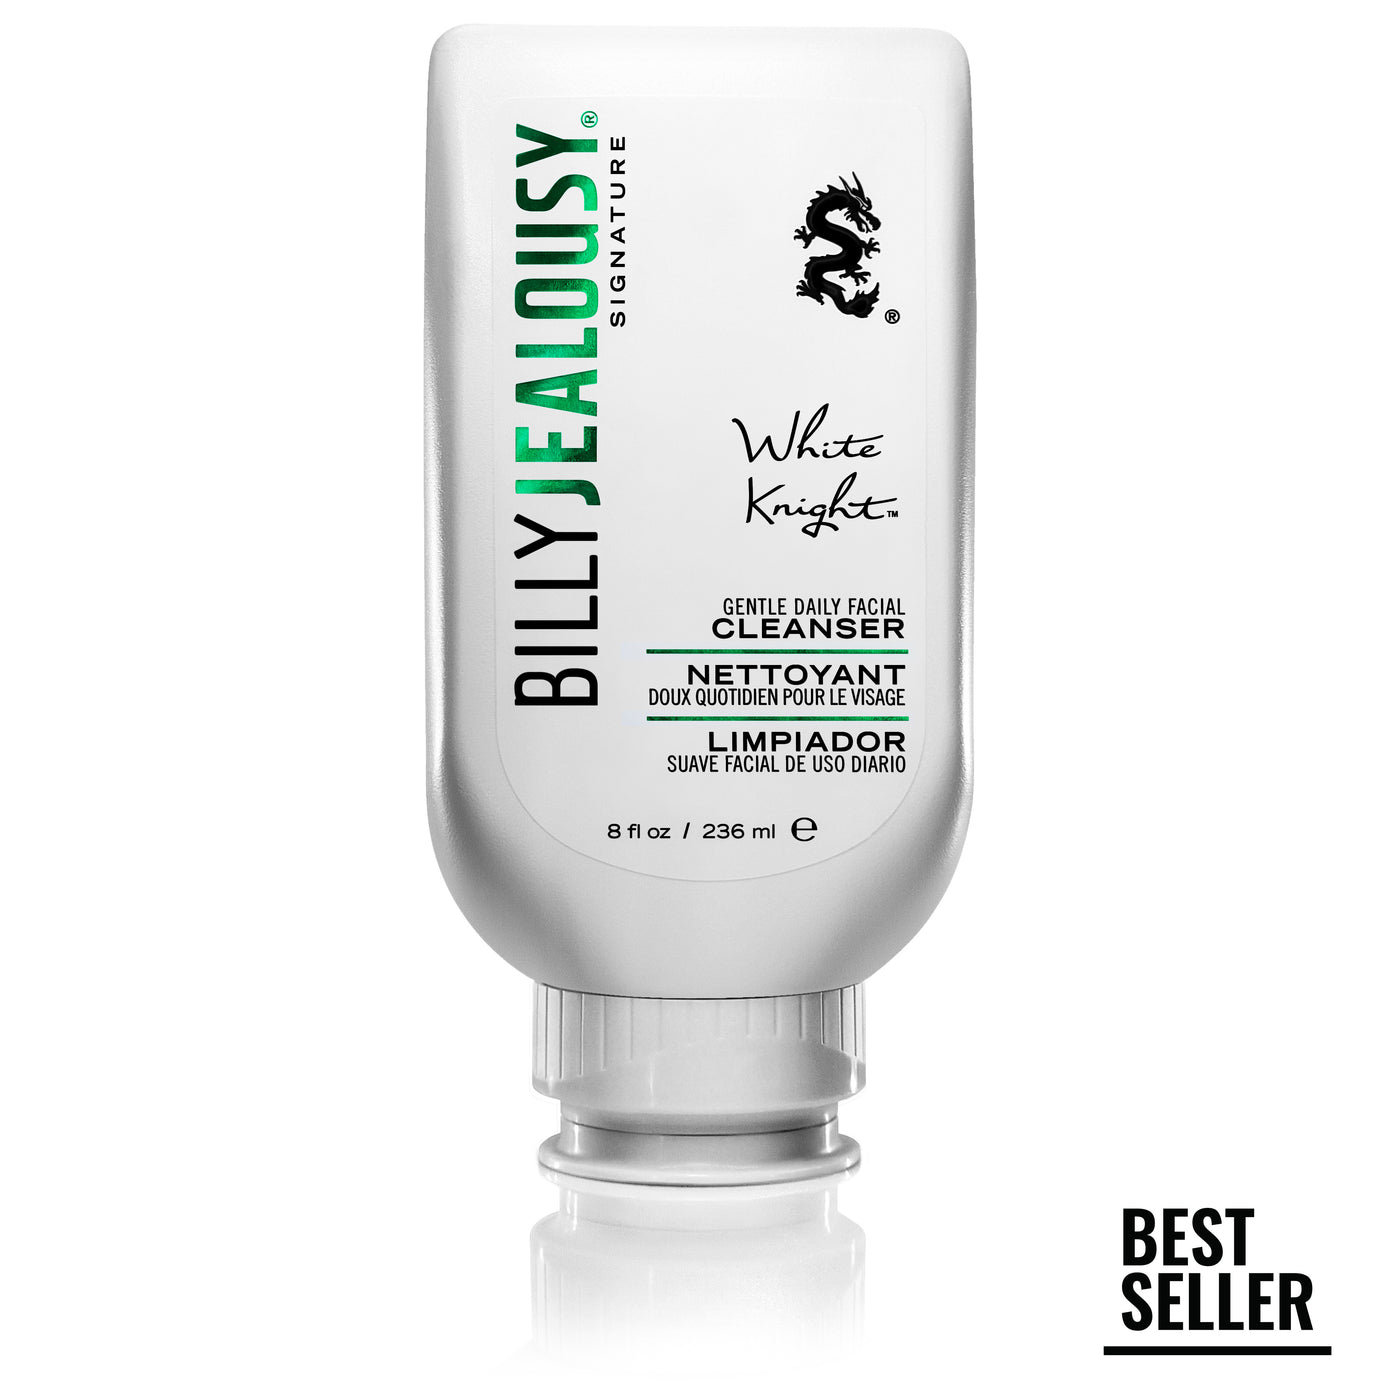 White Knight Gentle Daily Facial Cleanser